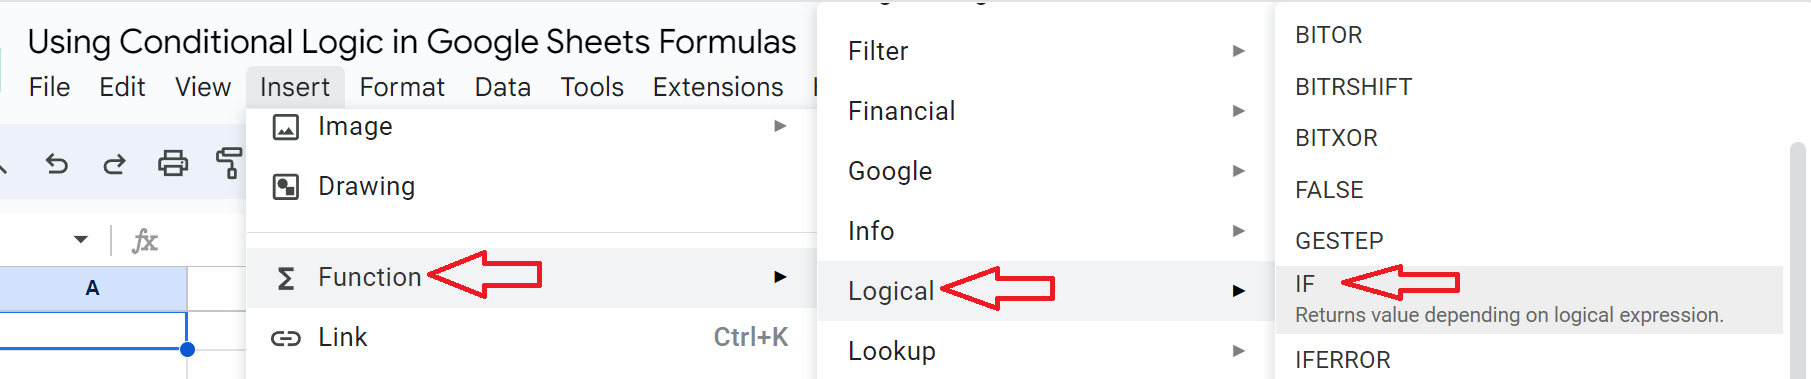 Using Conditional Logic in Google Sheets Formulas